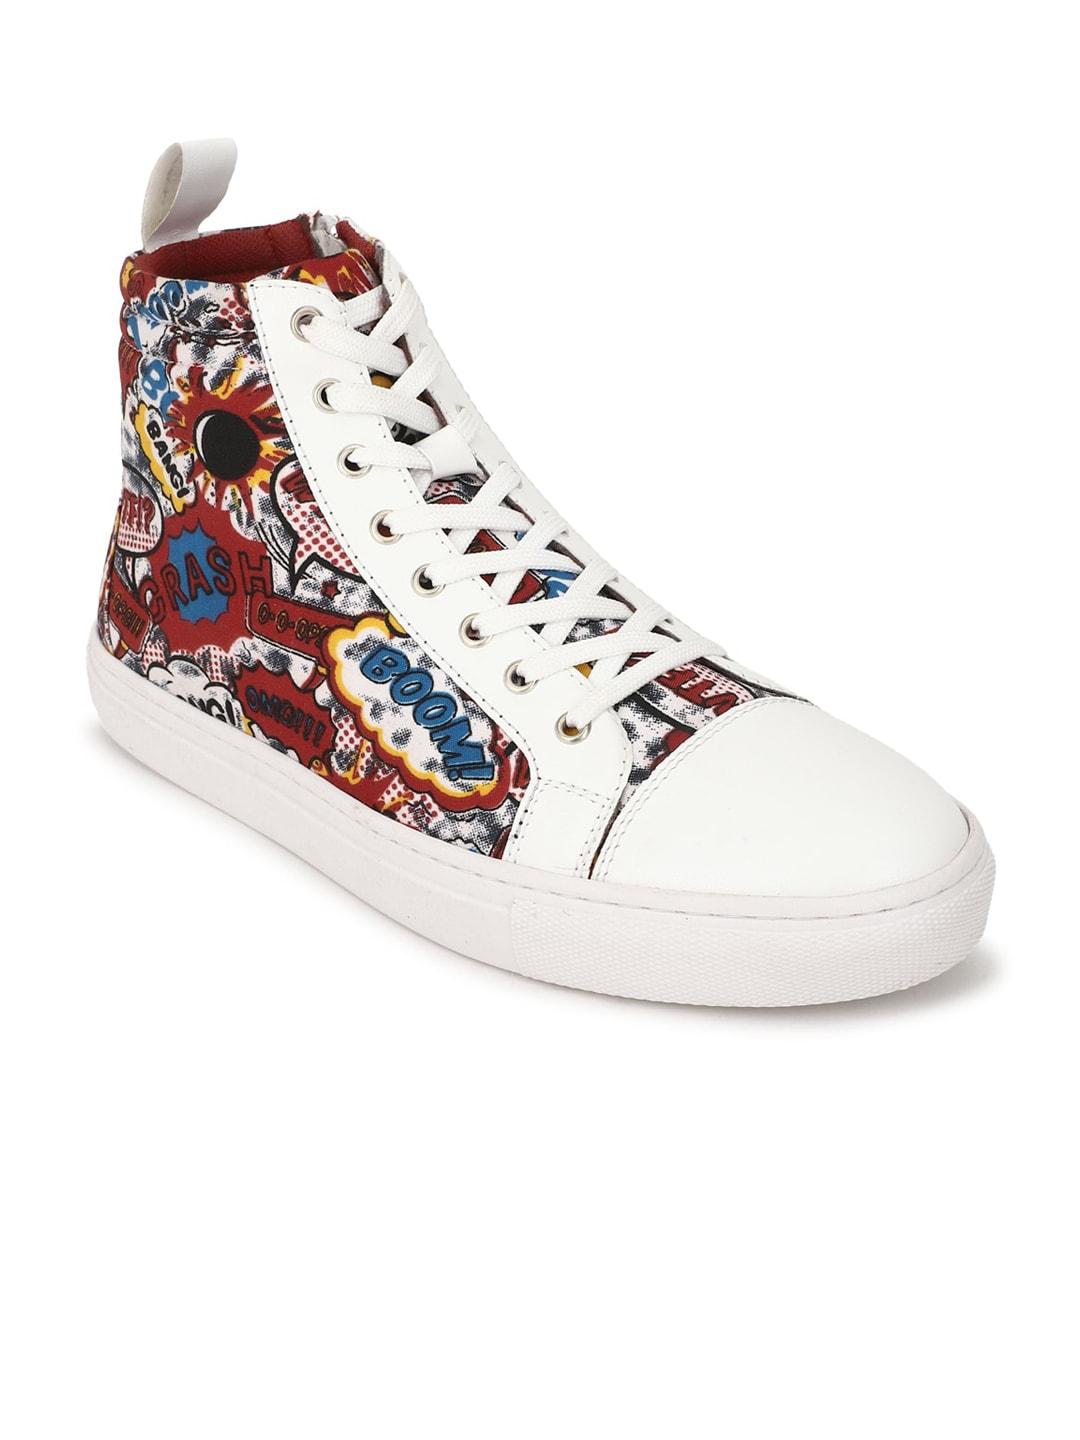 forever-21-women-white-printed-pu-sneakers